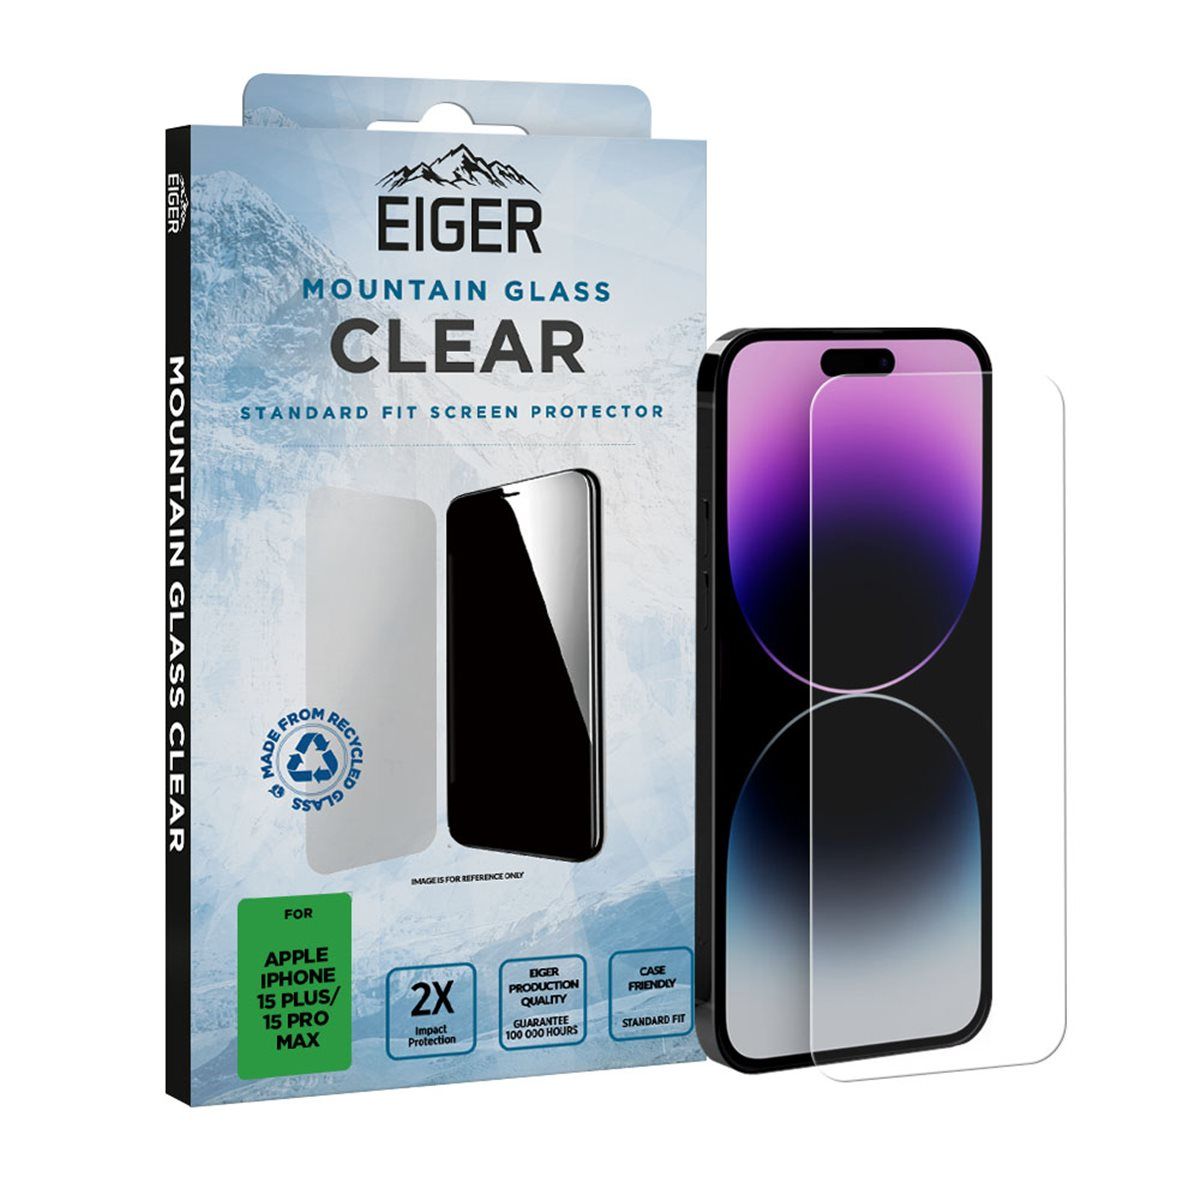 Eiger Mountain Glass Apple iPhone 15 Plus/ 15 Pro Max